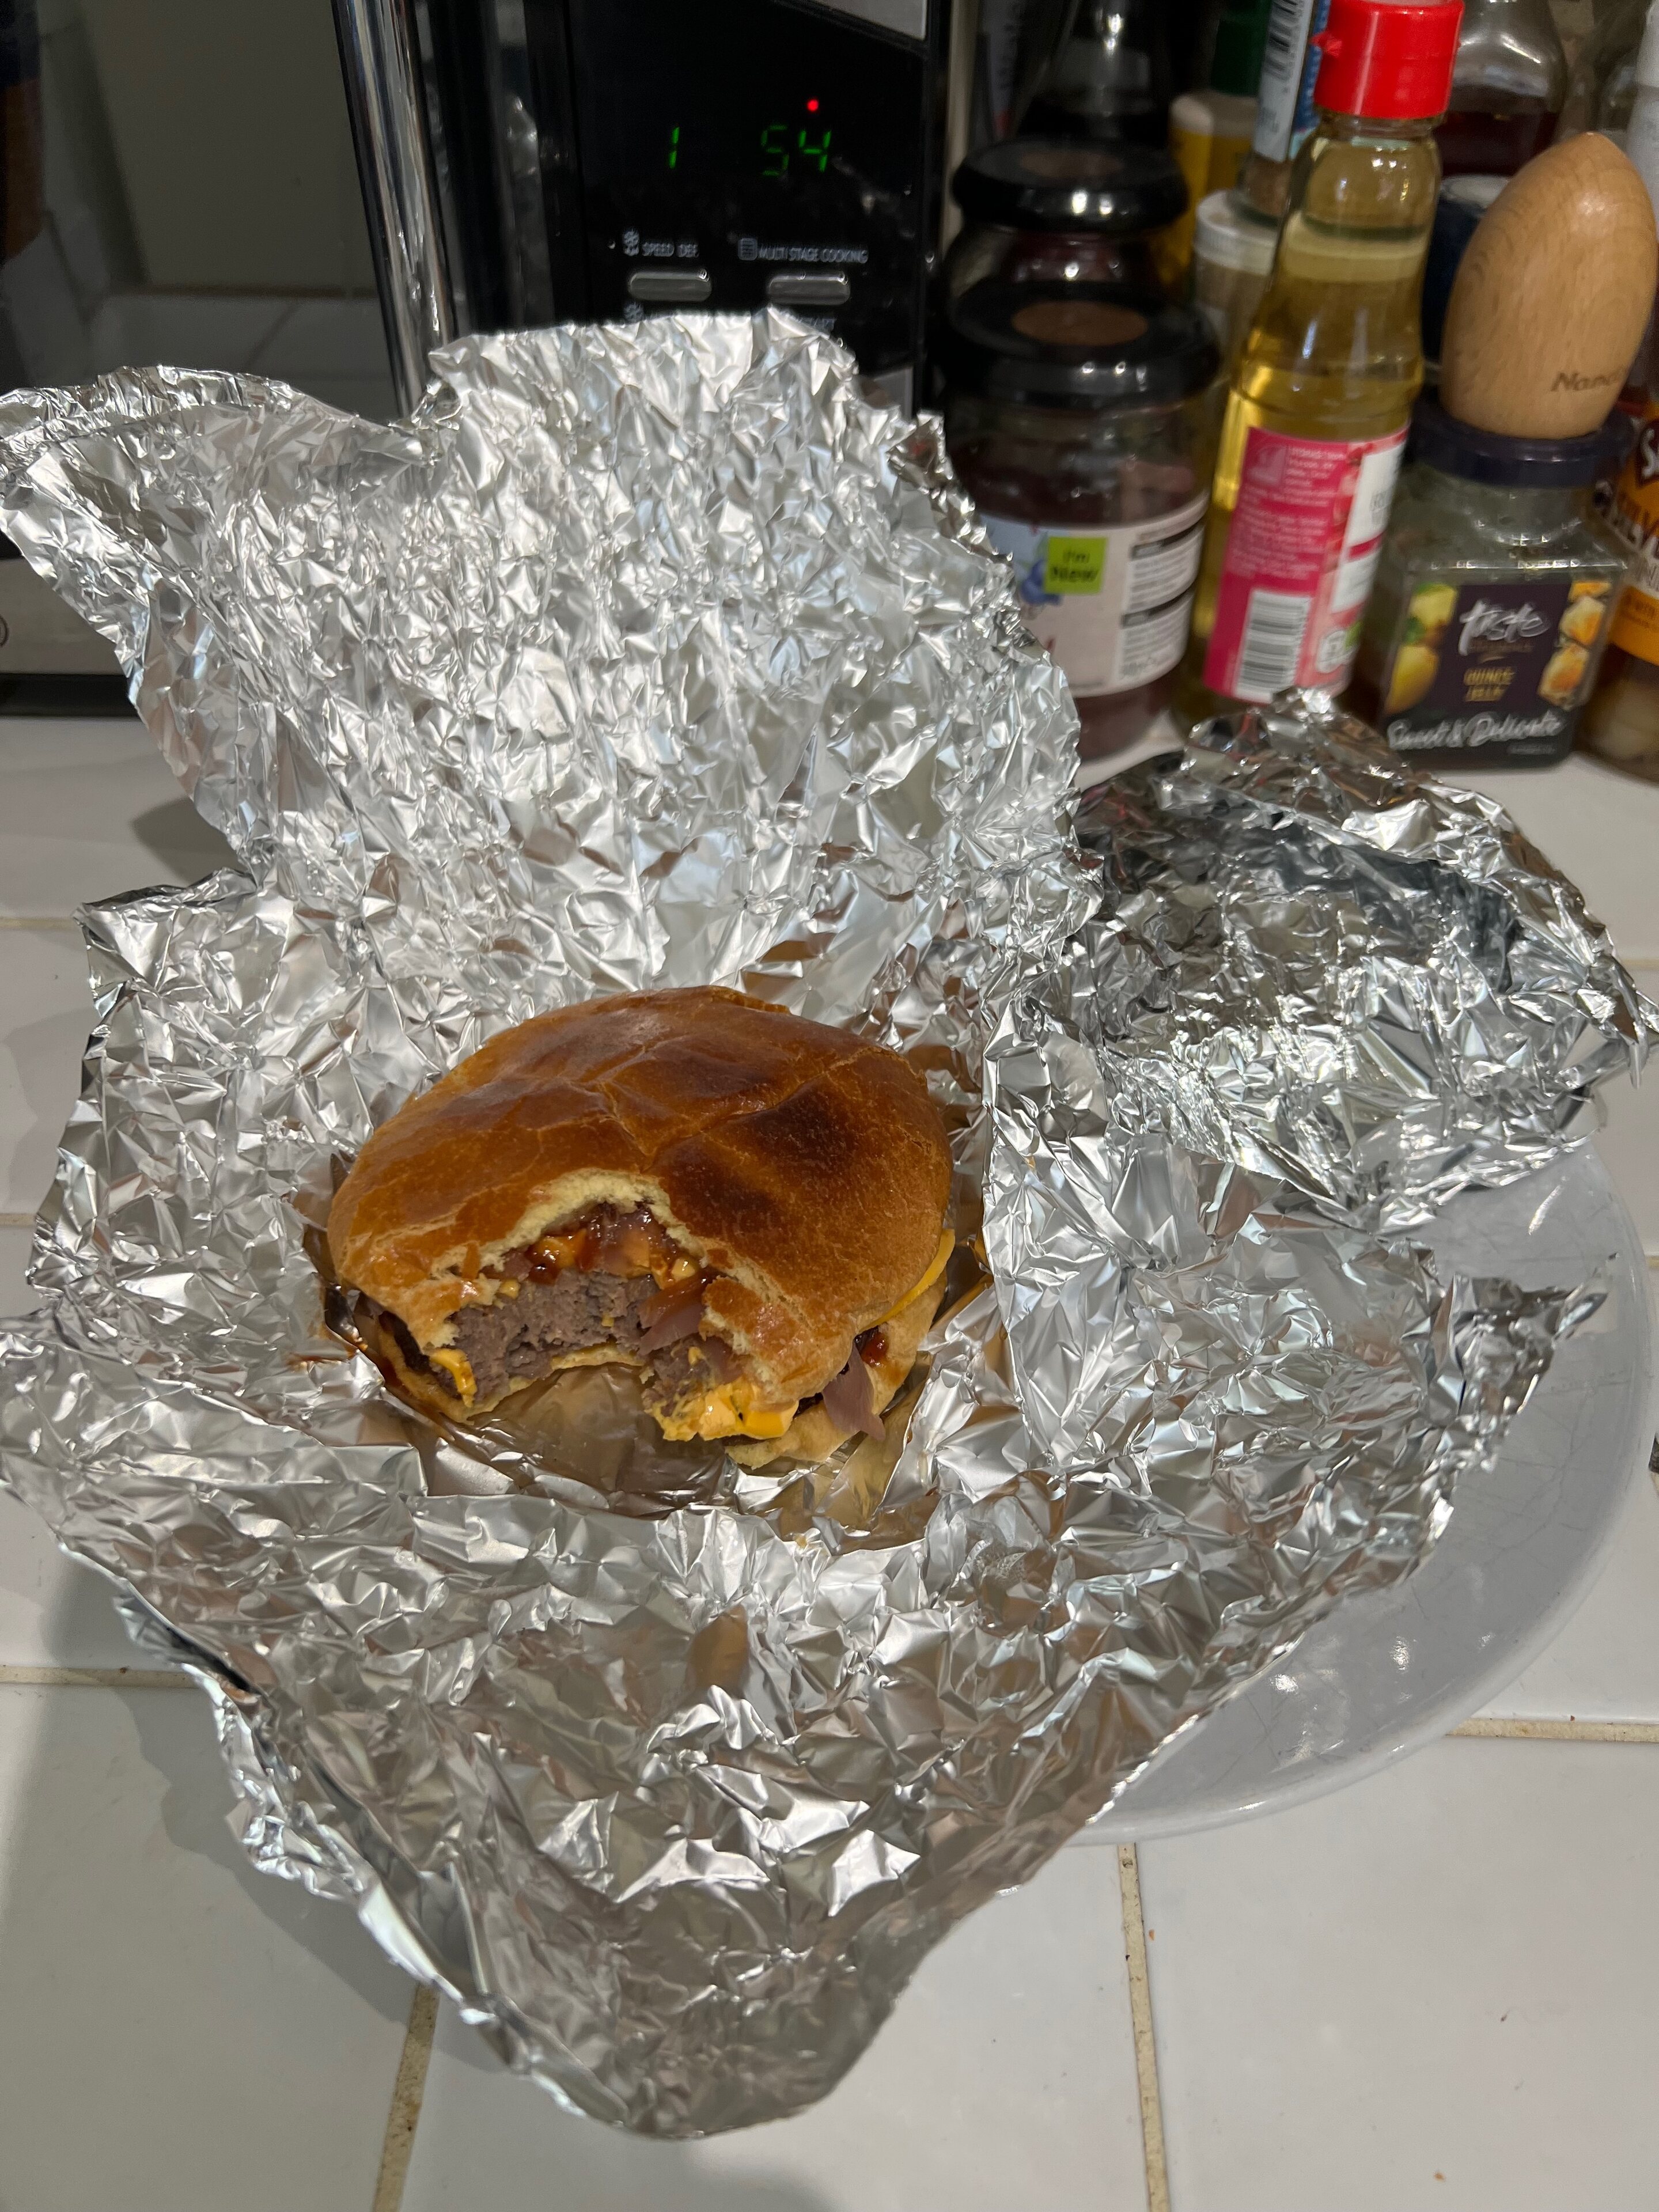 Pistonheads - The image shows a sandwich, possibly a hamburger or burrito, resting on top of some aluminum foil in a white plastic container. The container is placed on a kitchen counter, with various items like bottles and jars scattered around the background. The food is wrapped in foil, indicating it might be a takeout order or prepared for transportation. The counter itself appears to be part of a domestic kitchen setting.